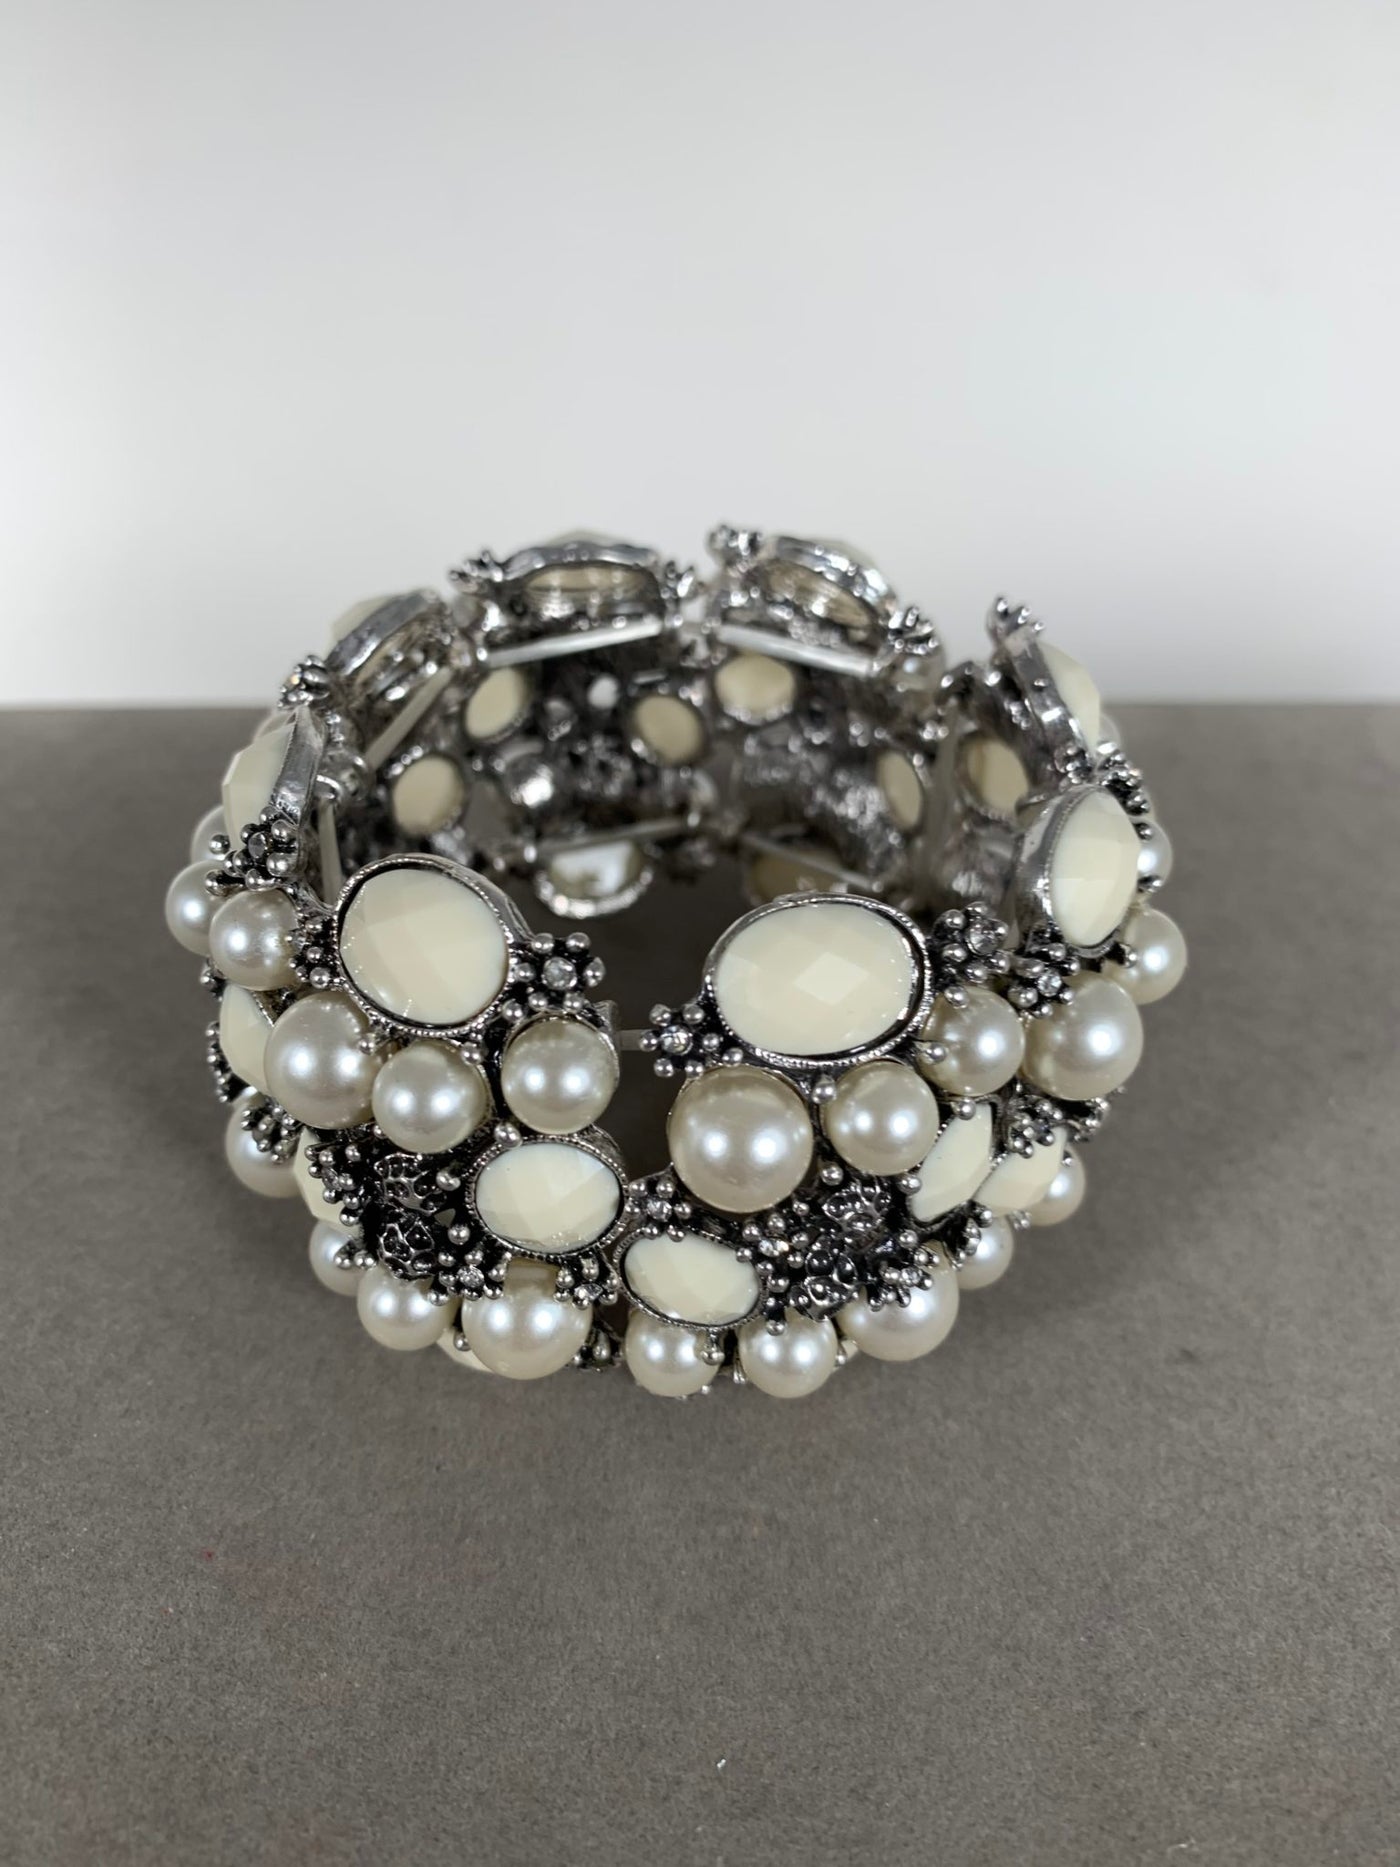 Pearlized Stretchy Bracelet with White Faux Stones